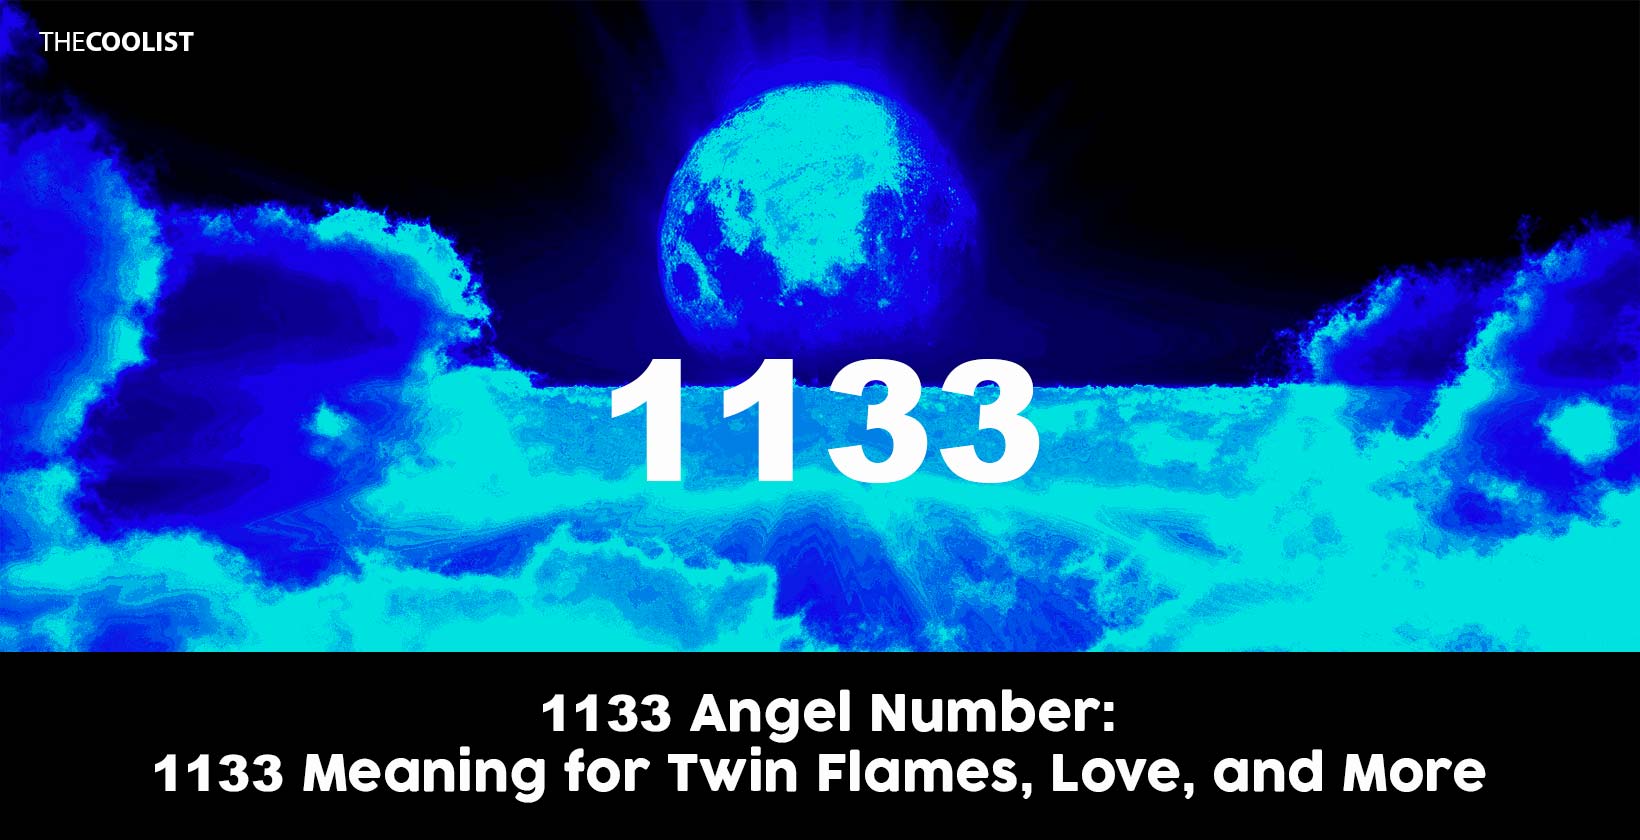 1133 Angel Number: 1133 Meaning for Twin Flames, Love, and More